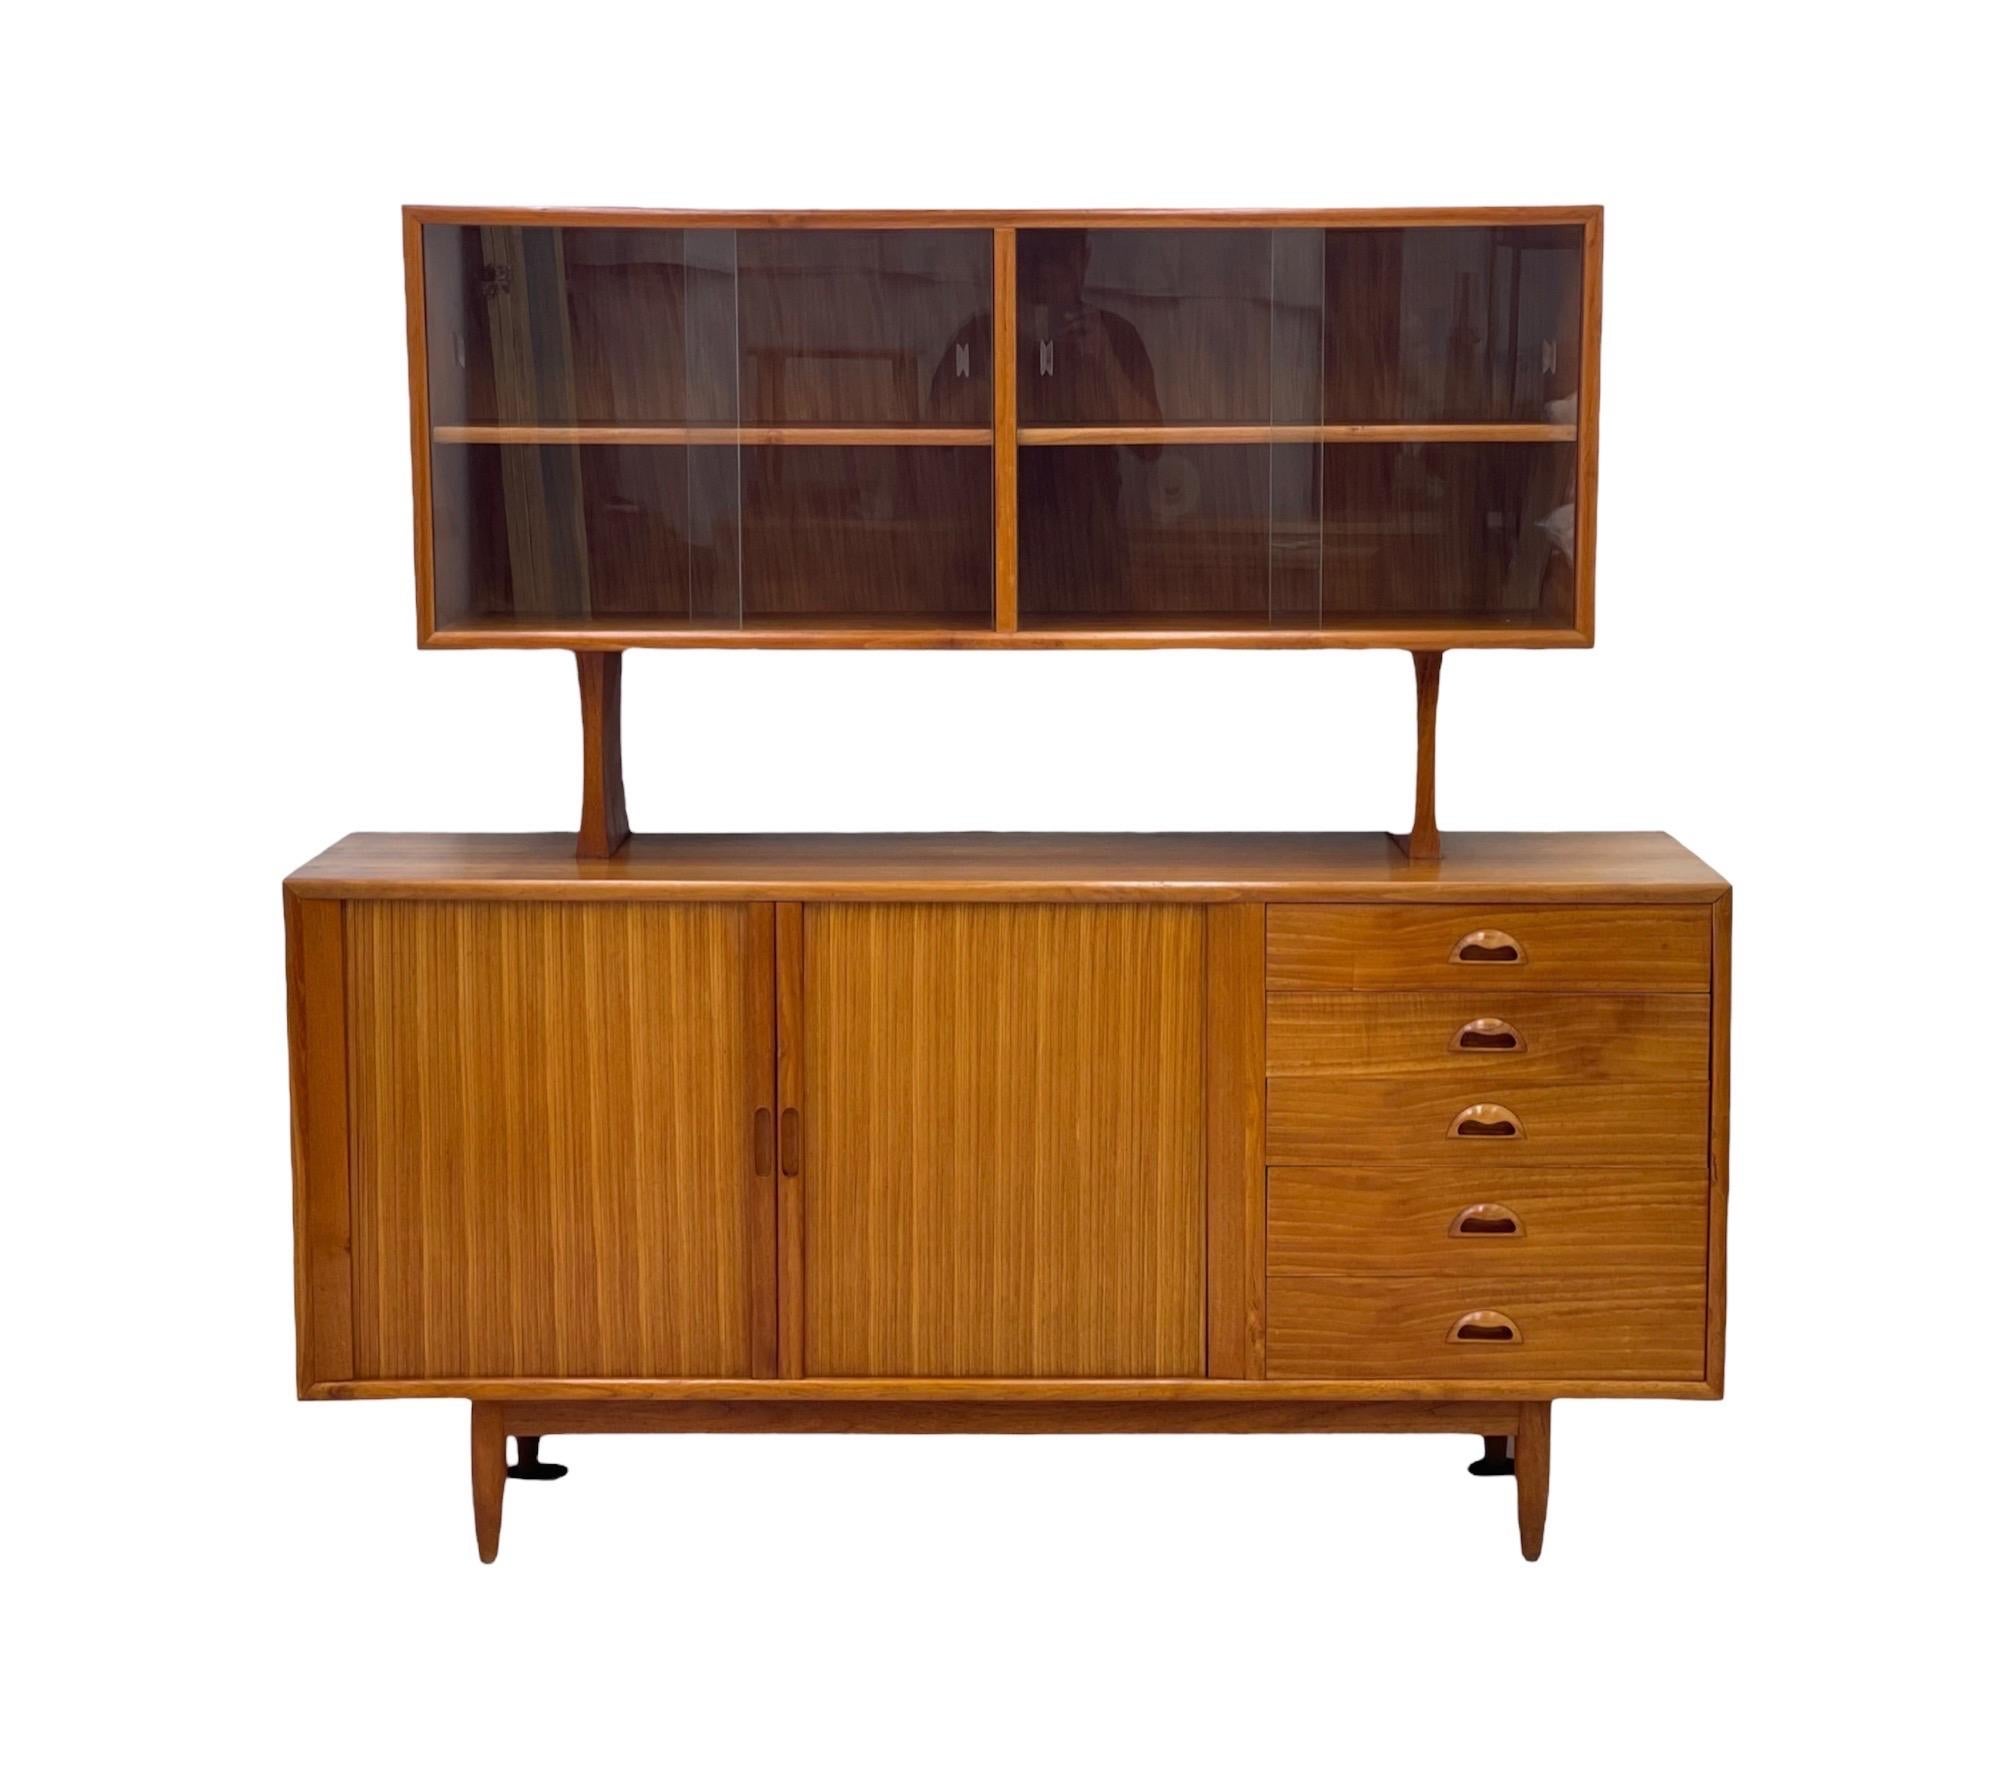 Vintage Danish Mid-Century Modern Teak Credenza Hutch tambour door dovetailed drawers

Dimensions overall 65 W; 62 H; 19 D 
Credenza cabinet dimension 36 W; 22 H; 17 D

Shelves adjustable and removable.